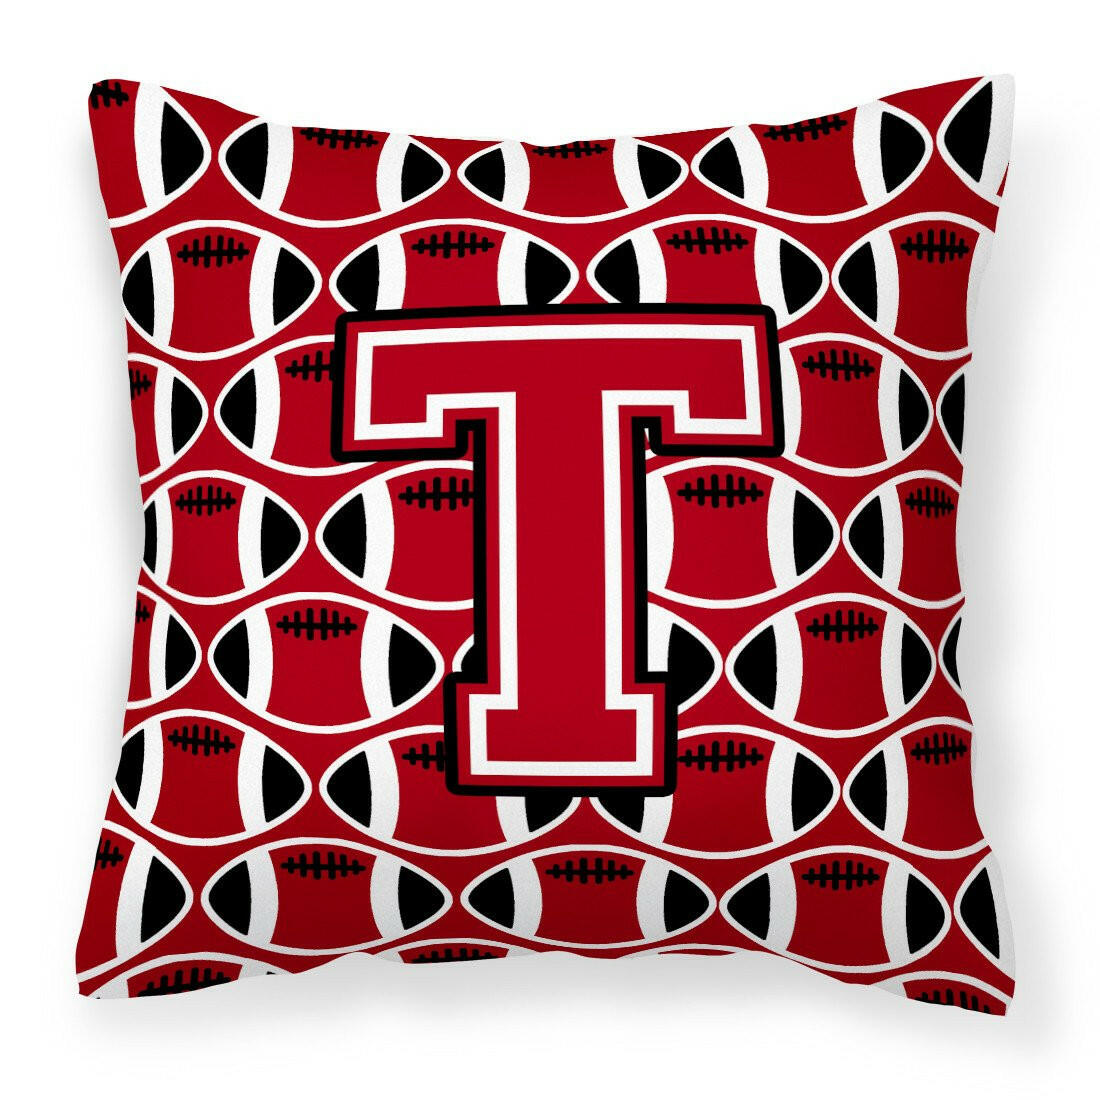 Letter T Football Red, Black and White Fabric Decorative Pillow CJ1073-TPW1414 by Caroline's Treasures